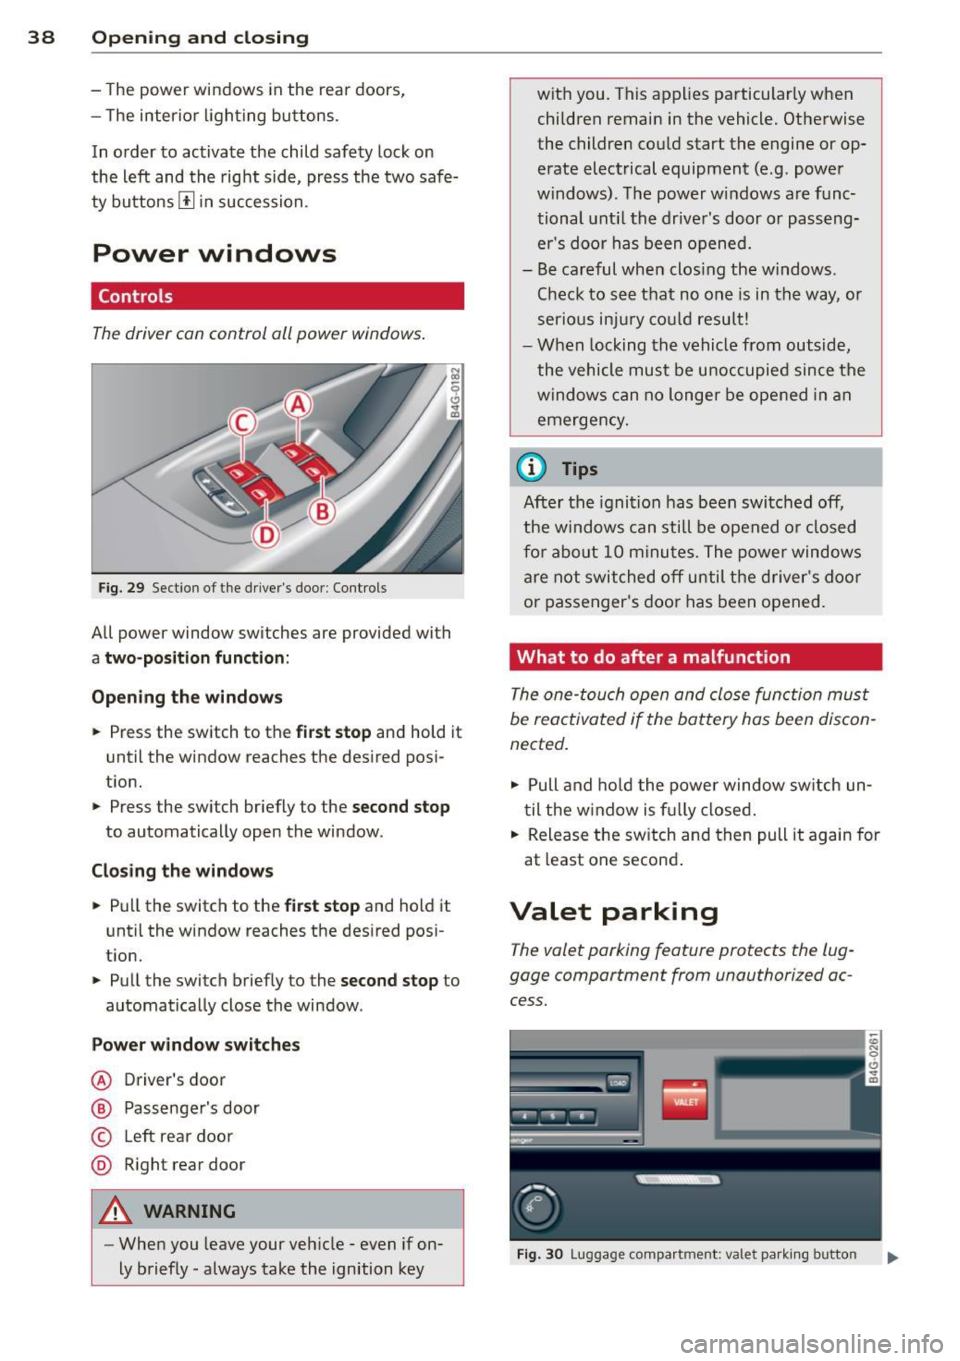 AUDI S6 2012 Owners Guide 38  Openin g and  clo sing 
- The  power  windows  in the  rear  doors, 
- The  interior  l ighting  buttons. 
In  order  to  activate  the  child  safety  lock on 
the  left  and  the  right  side,  